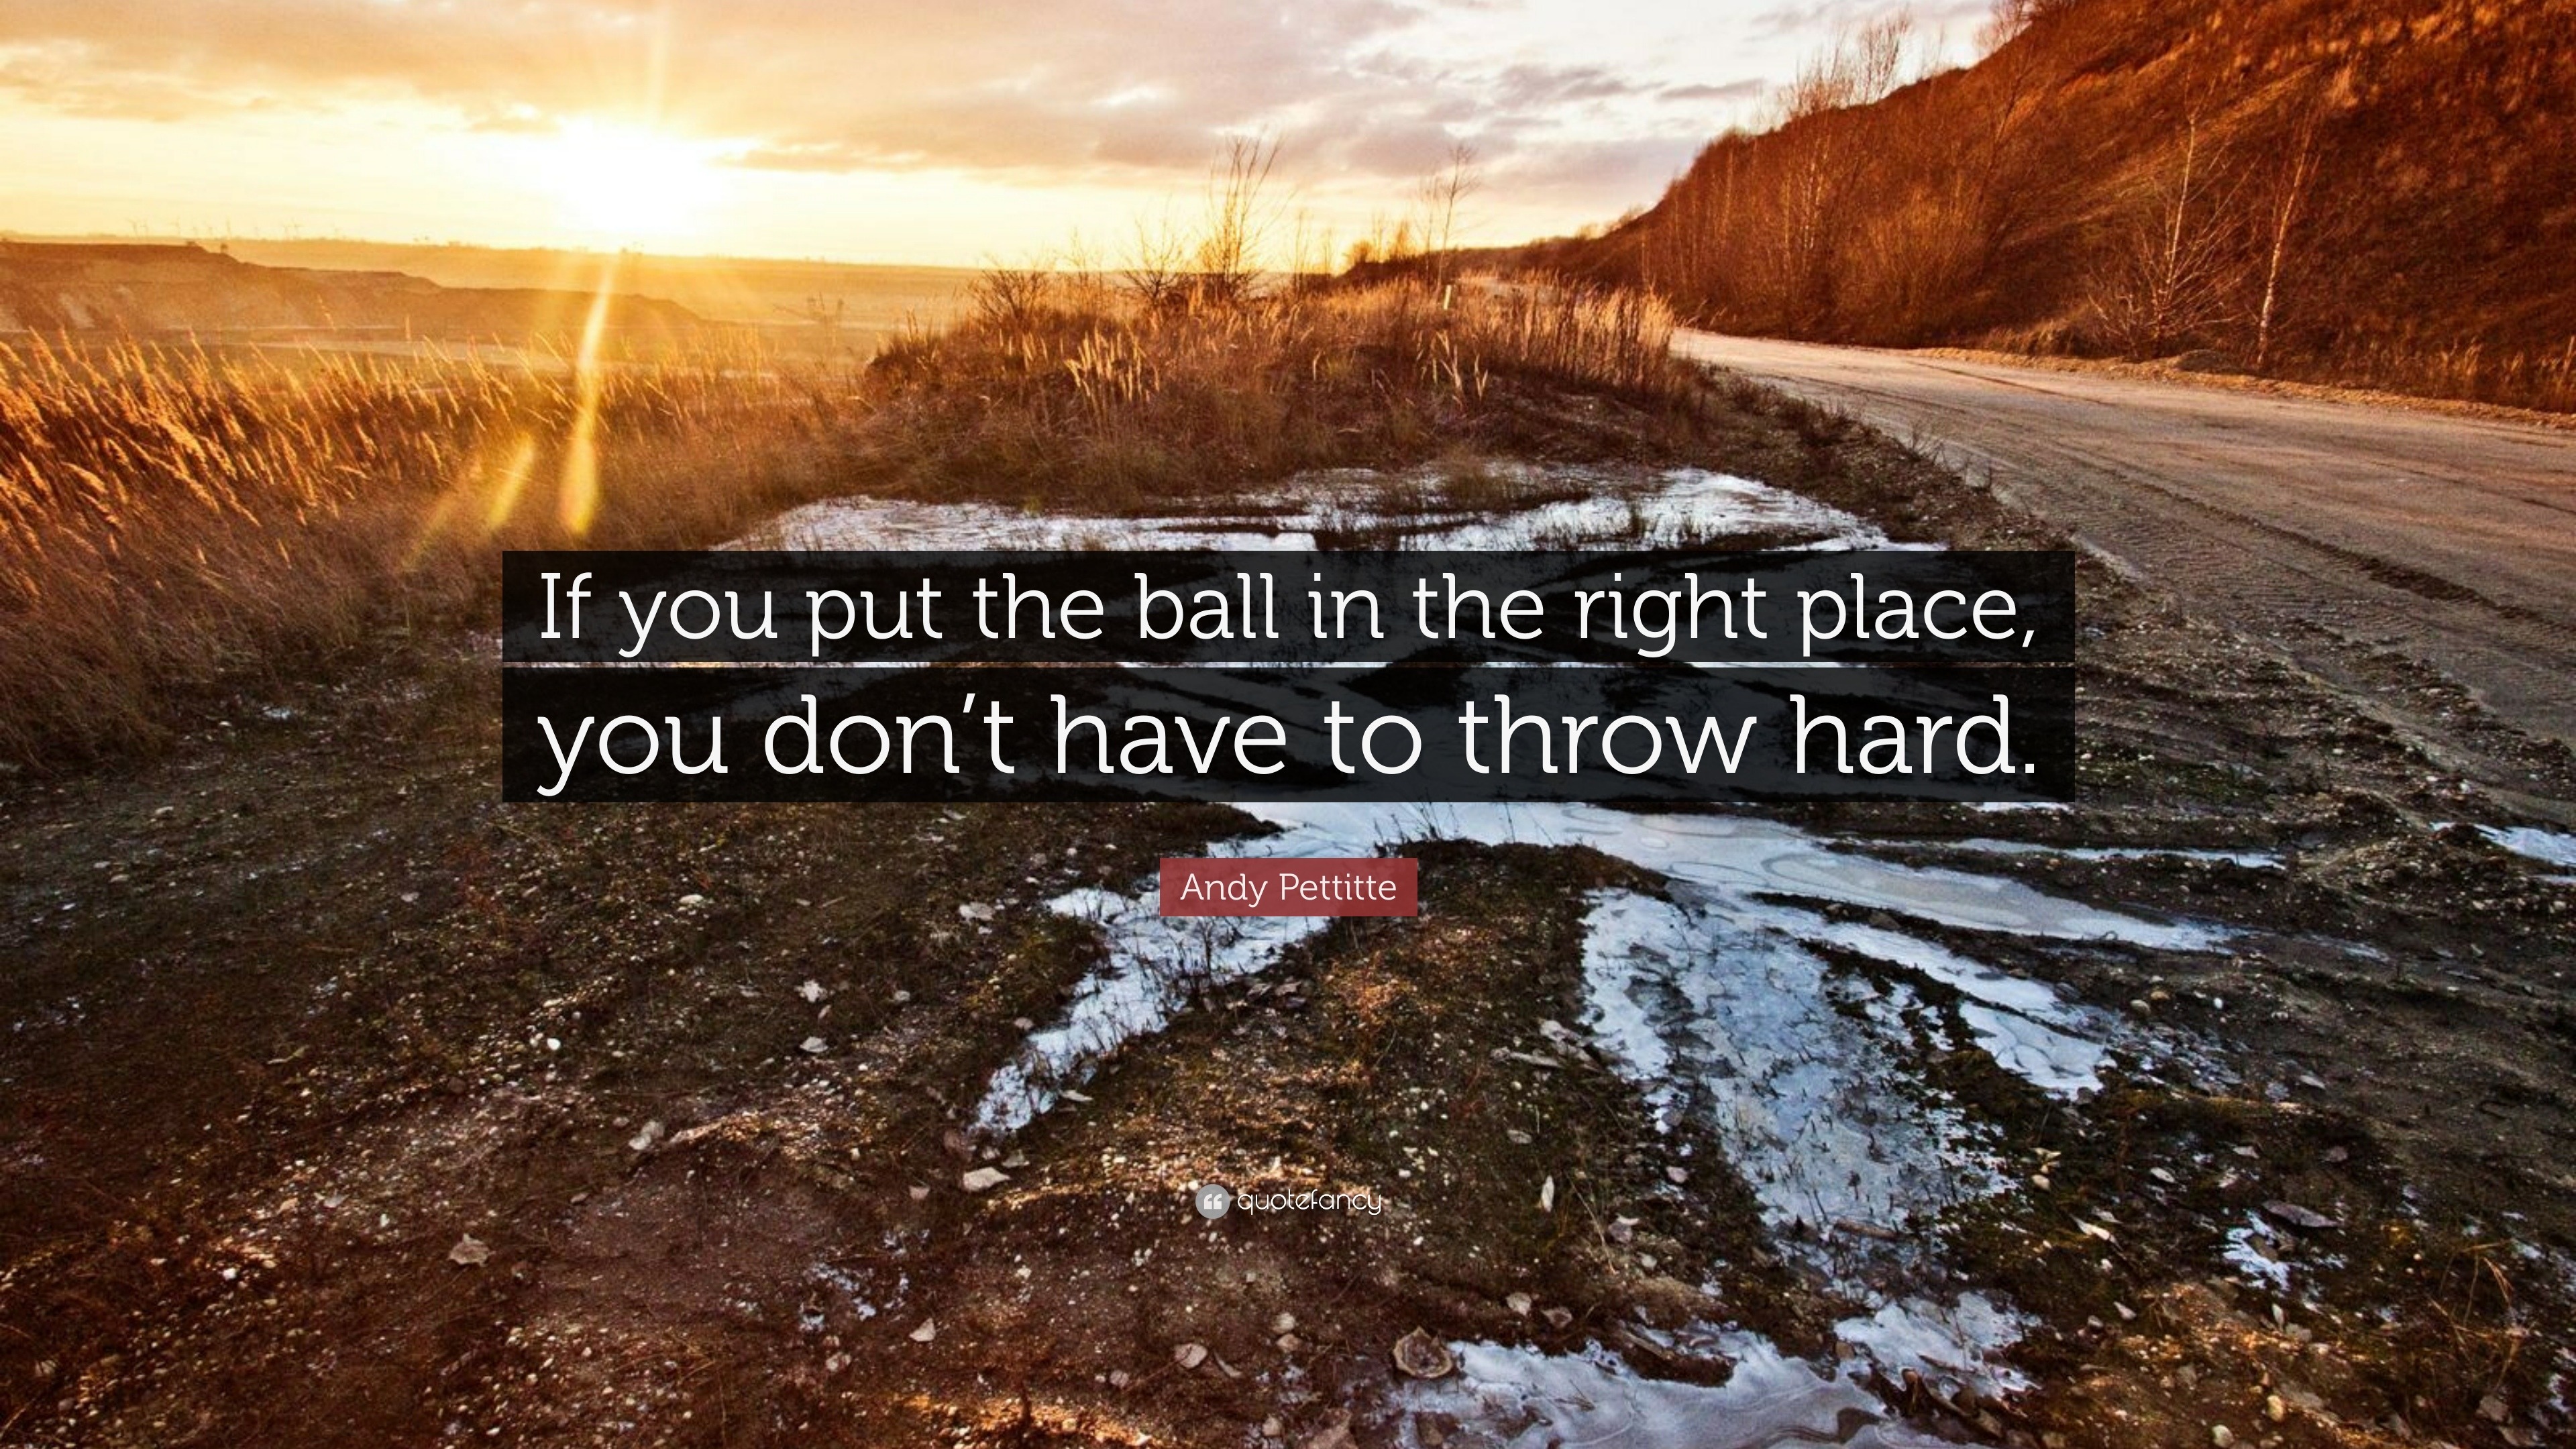 Andy Pettitte Quote: “If you put the ball in the right place, you